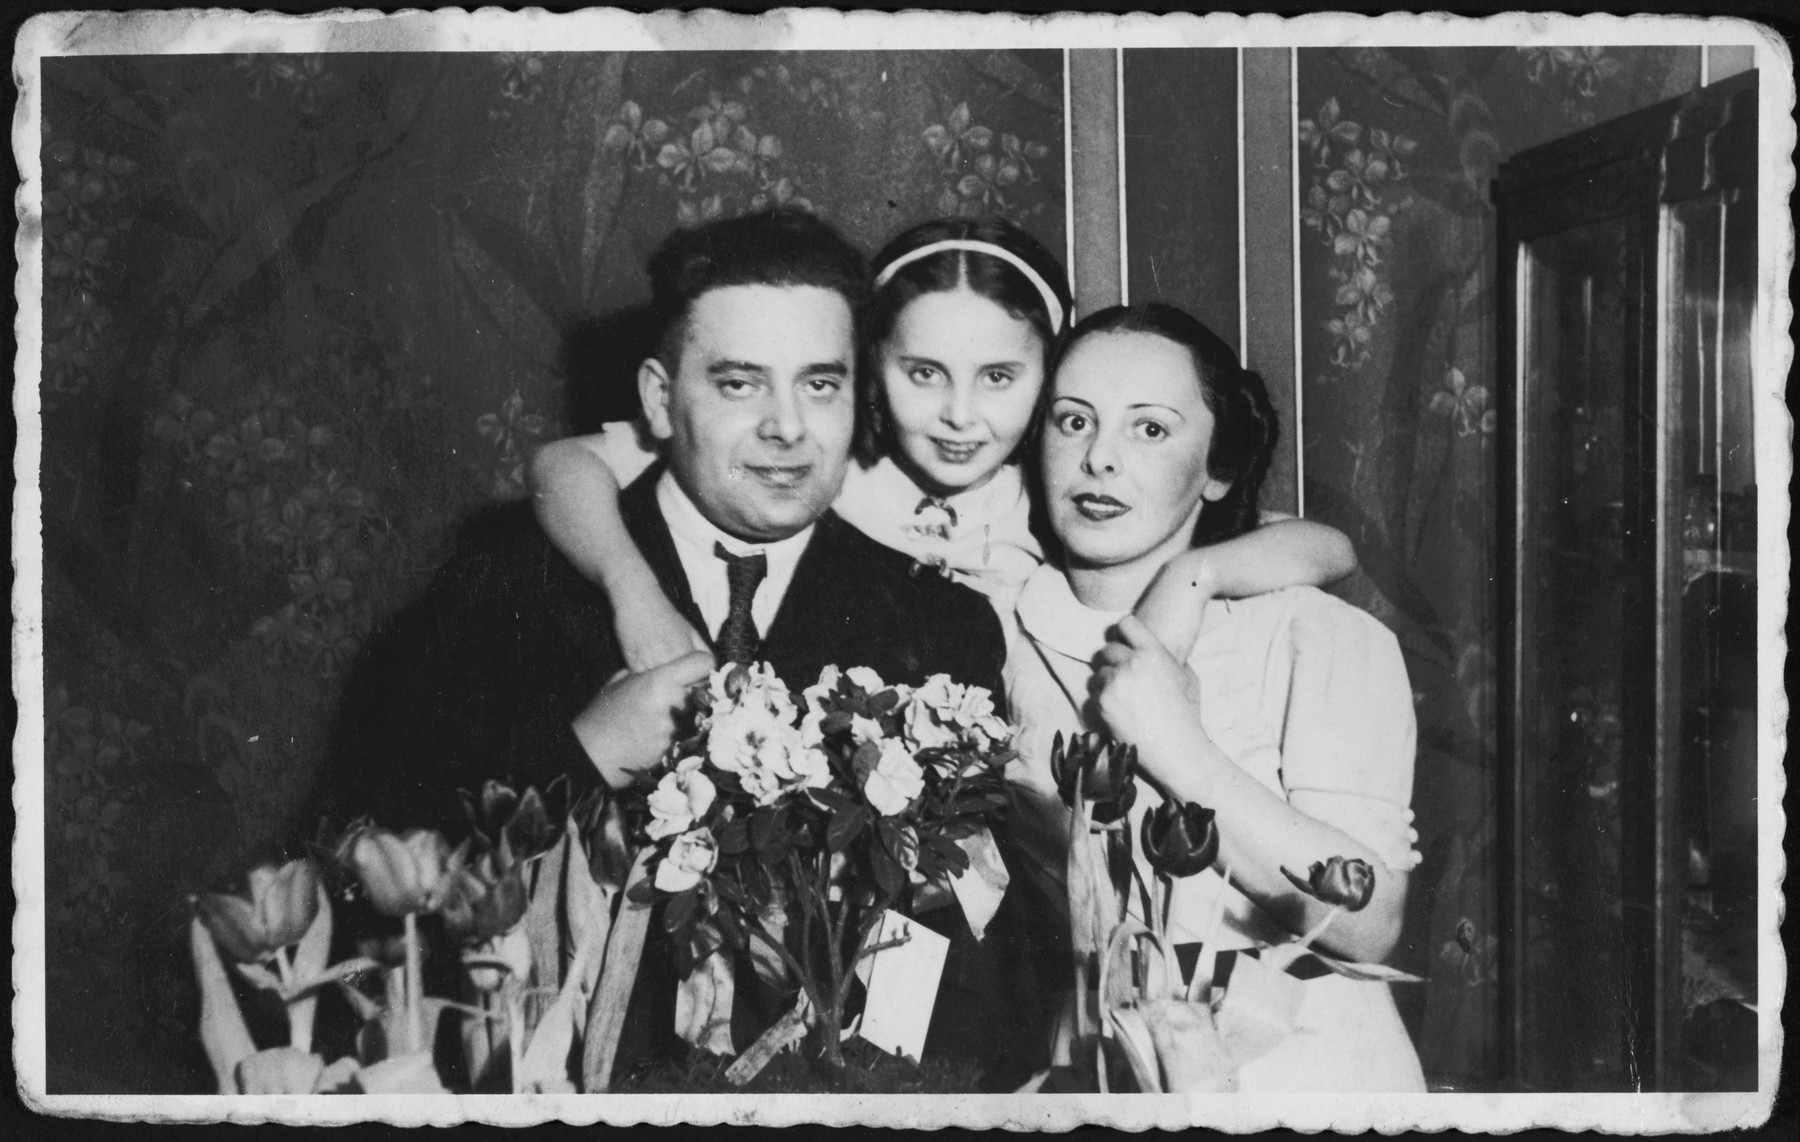 A young girl poses between her parents surrounded by flowers during their 10th anniversary party.

Pictured are Josef, Rina and Ada Altbeker.